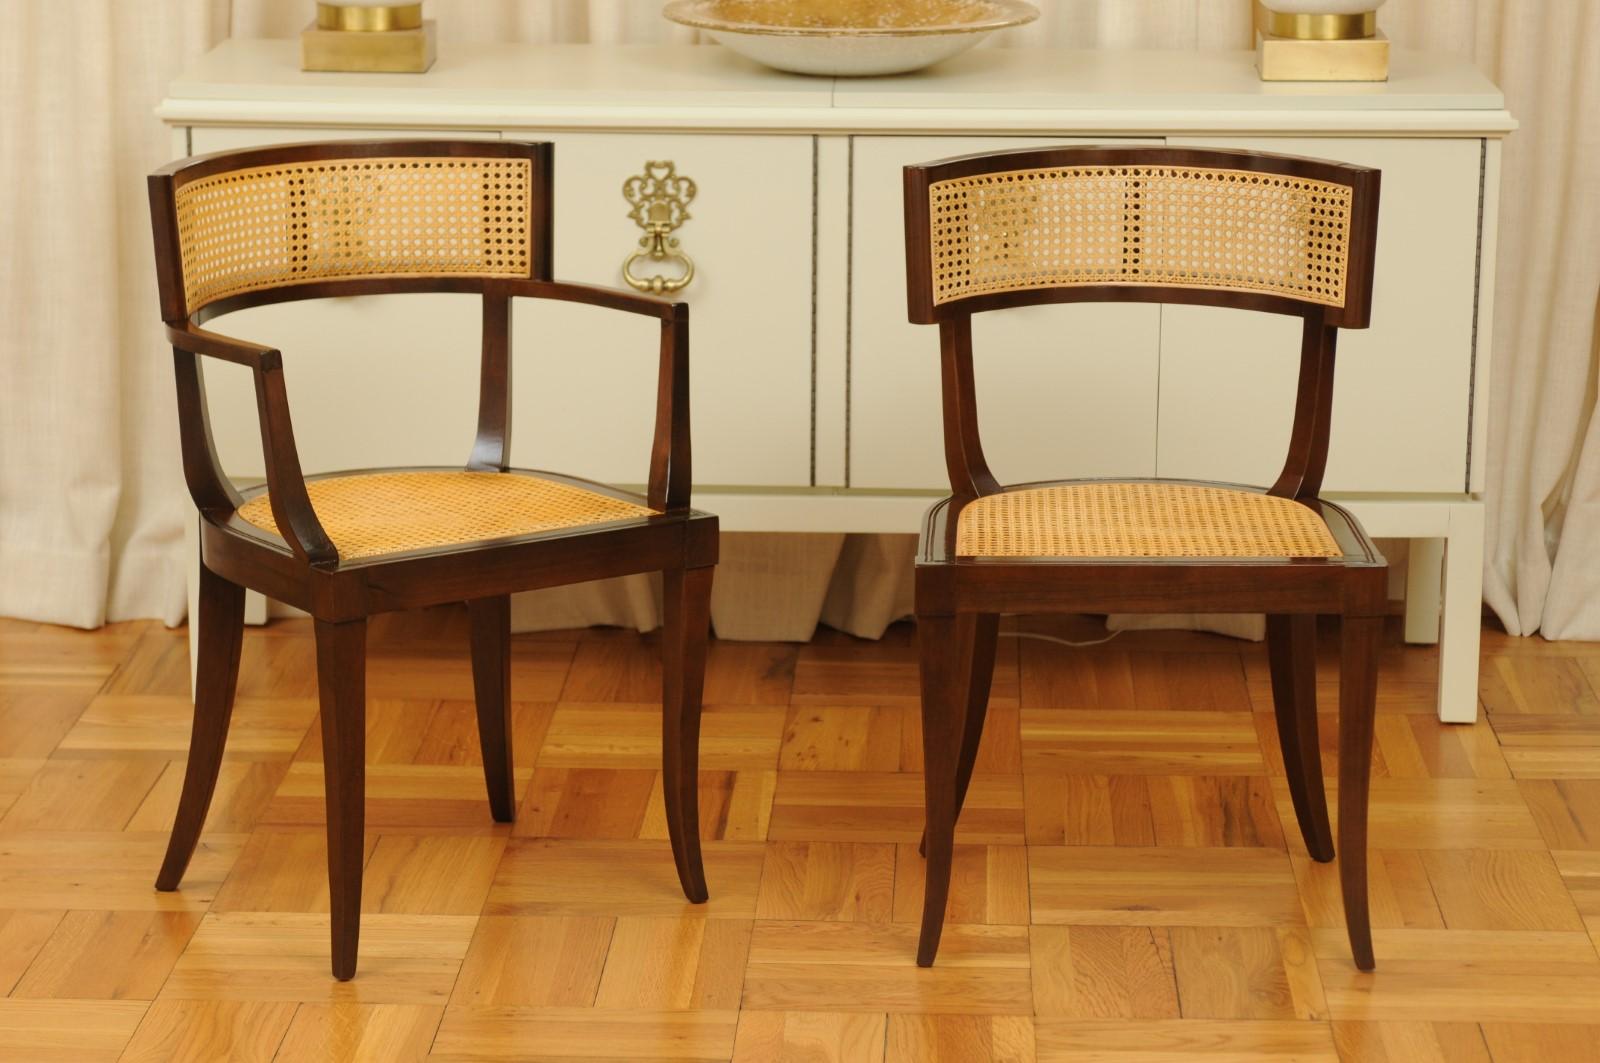 These magnificent dining chairs are shipped as professionally photographed and described in the listing narrative: Meticulously professionally restored and installation ready. This large set is unique on the World market. Expert custom upholstery